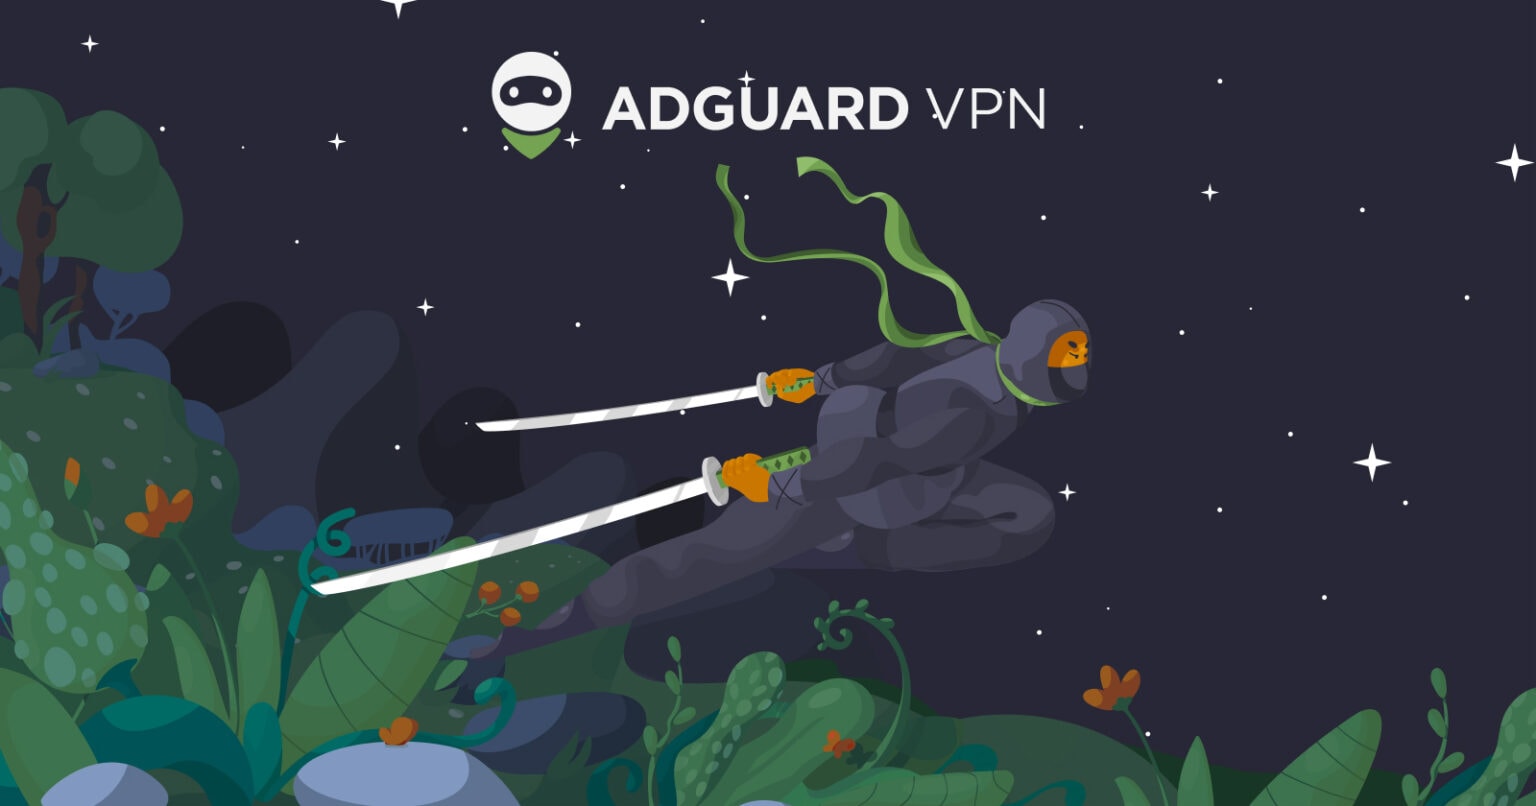 Tired of sacrificing speed for security or vice versa? Try Adguard VPN.